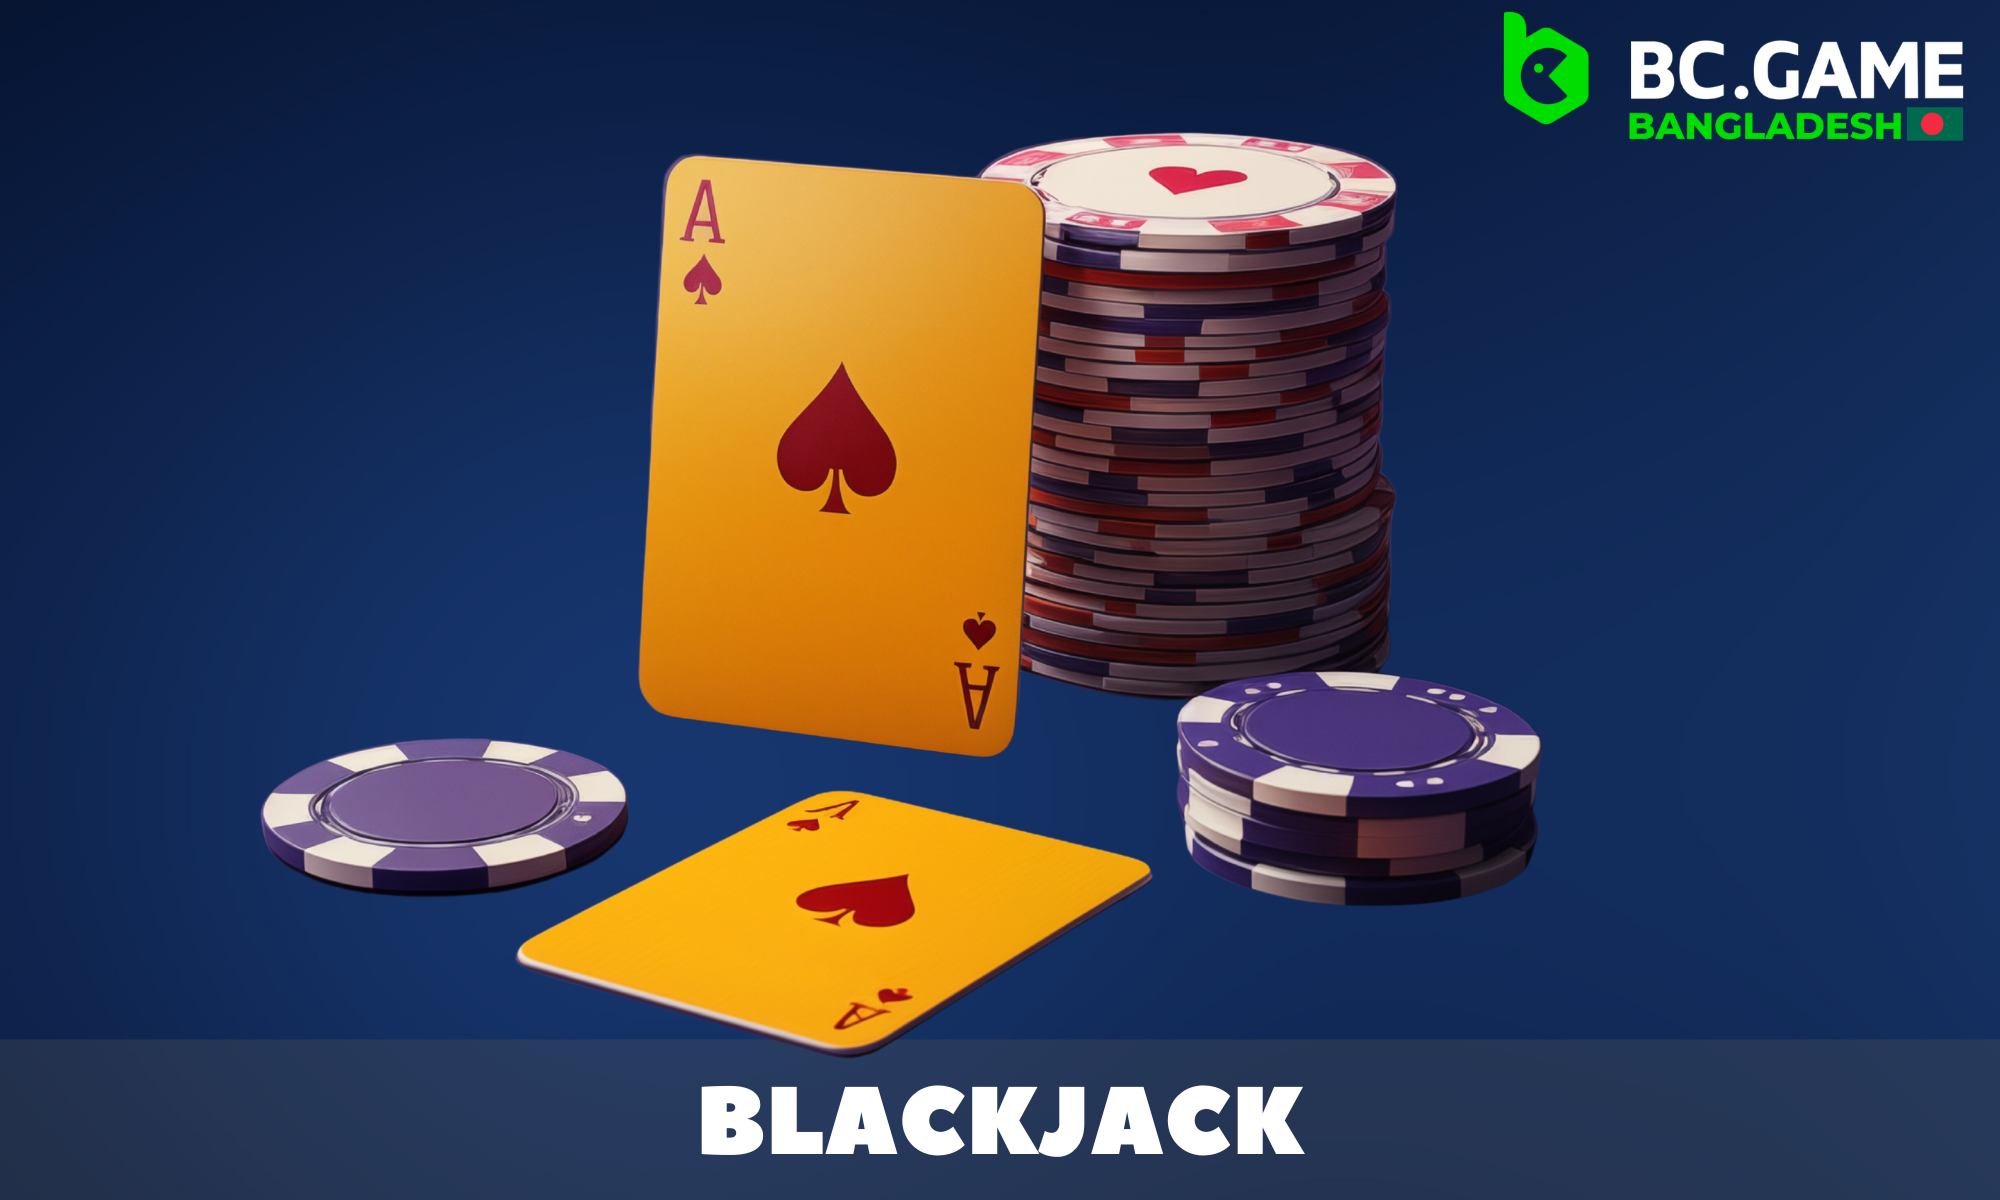 In the BC Game, you can play various versions of blackjack from the available 30 games